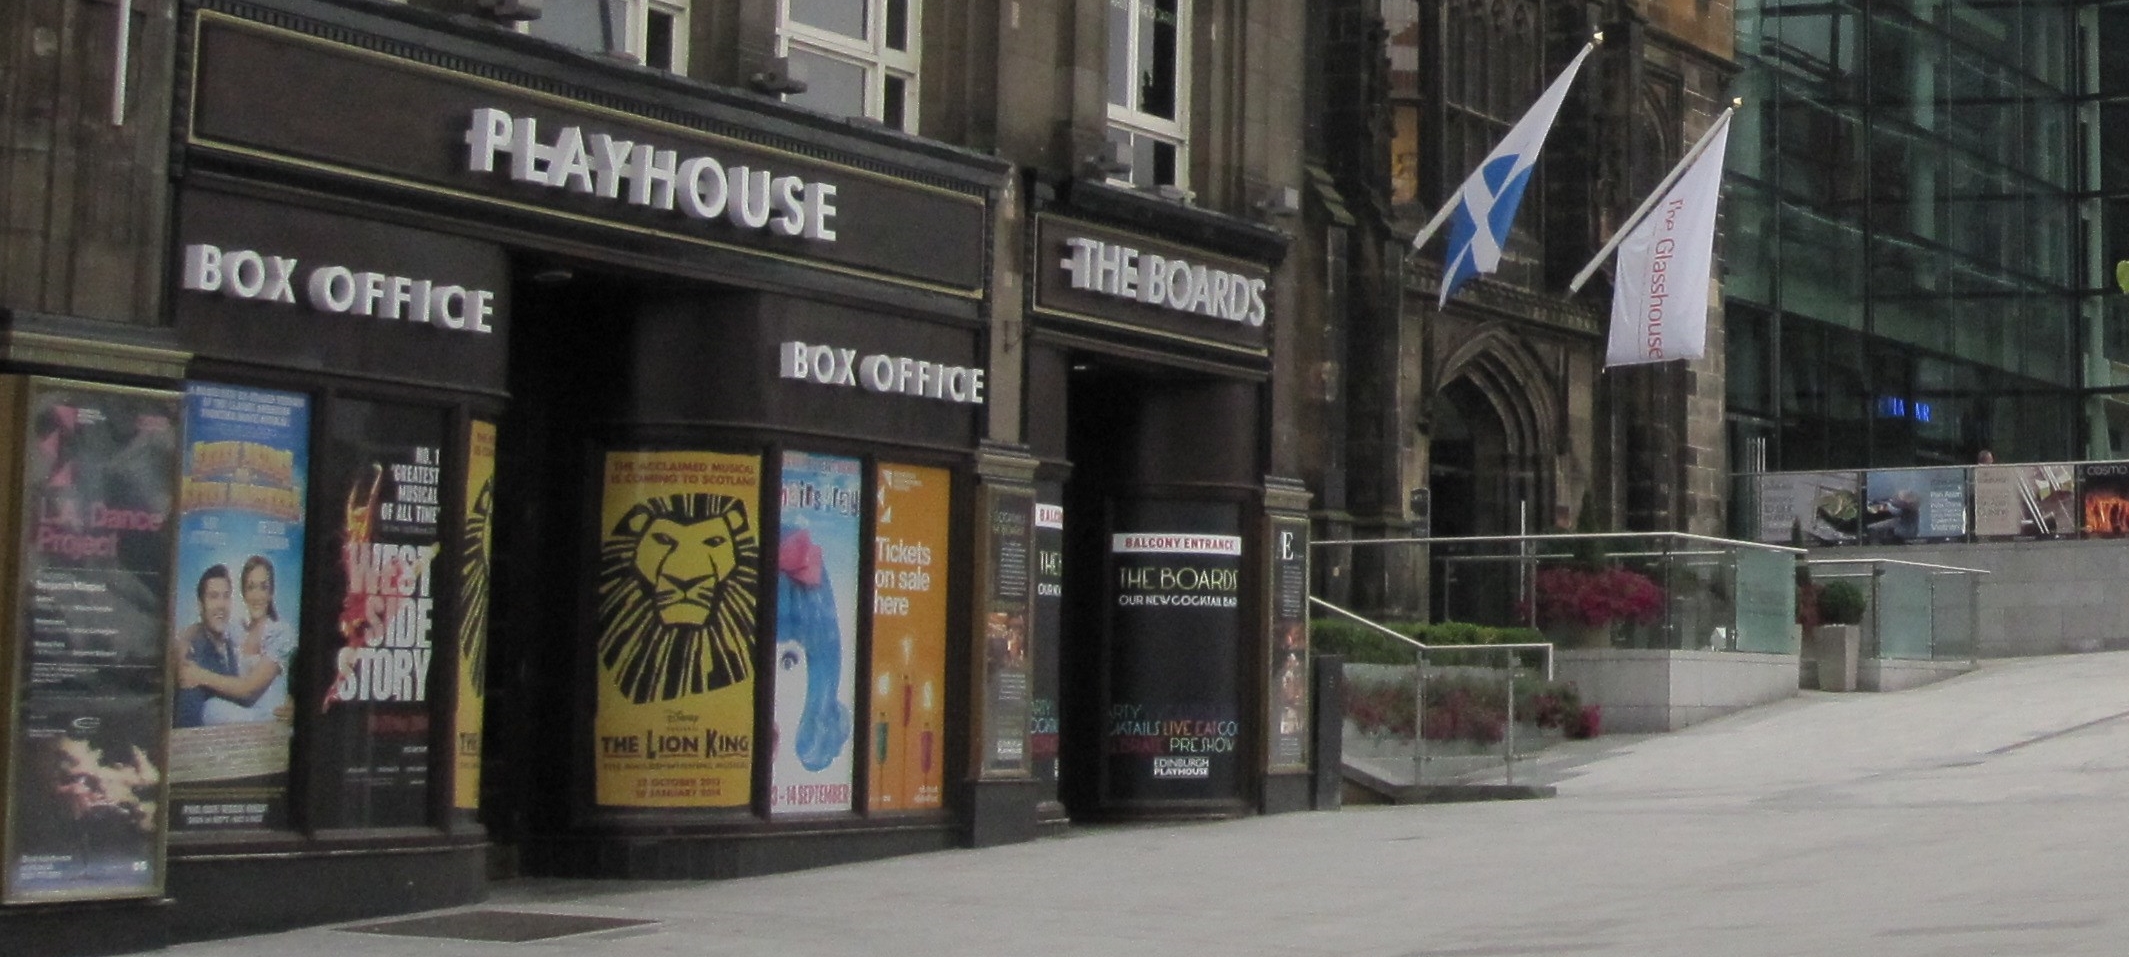 Picture of Edinburgh Playhouse - Euan's Guide Banner Photo